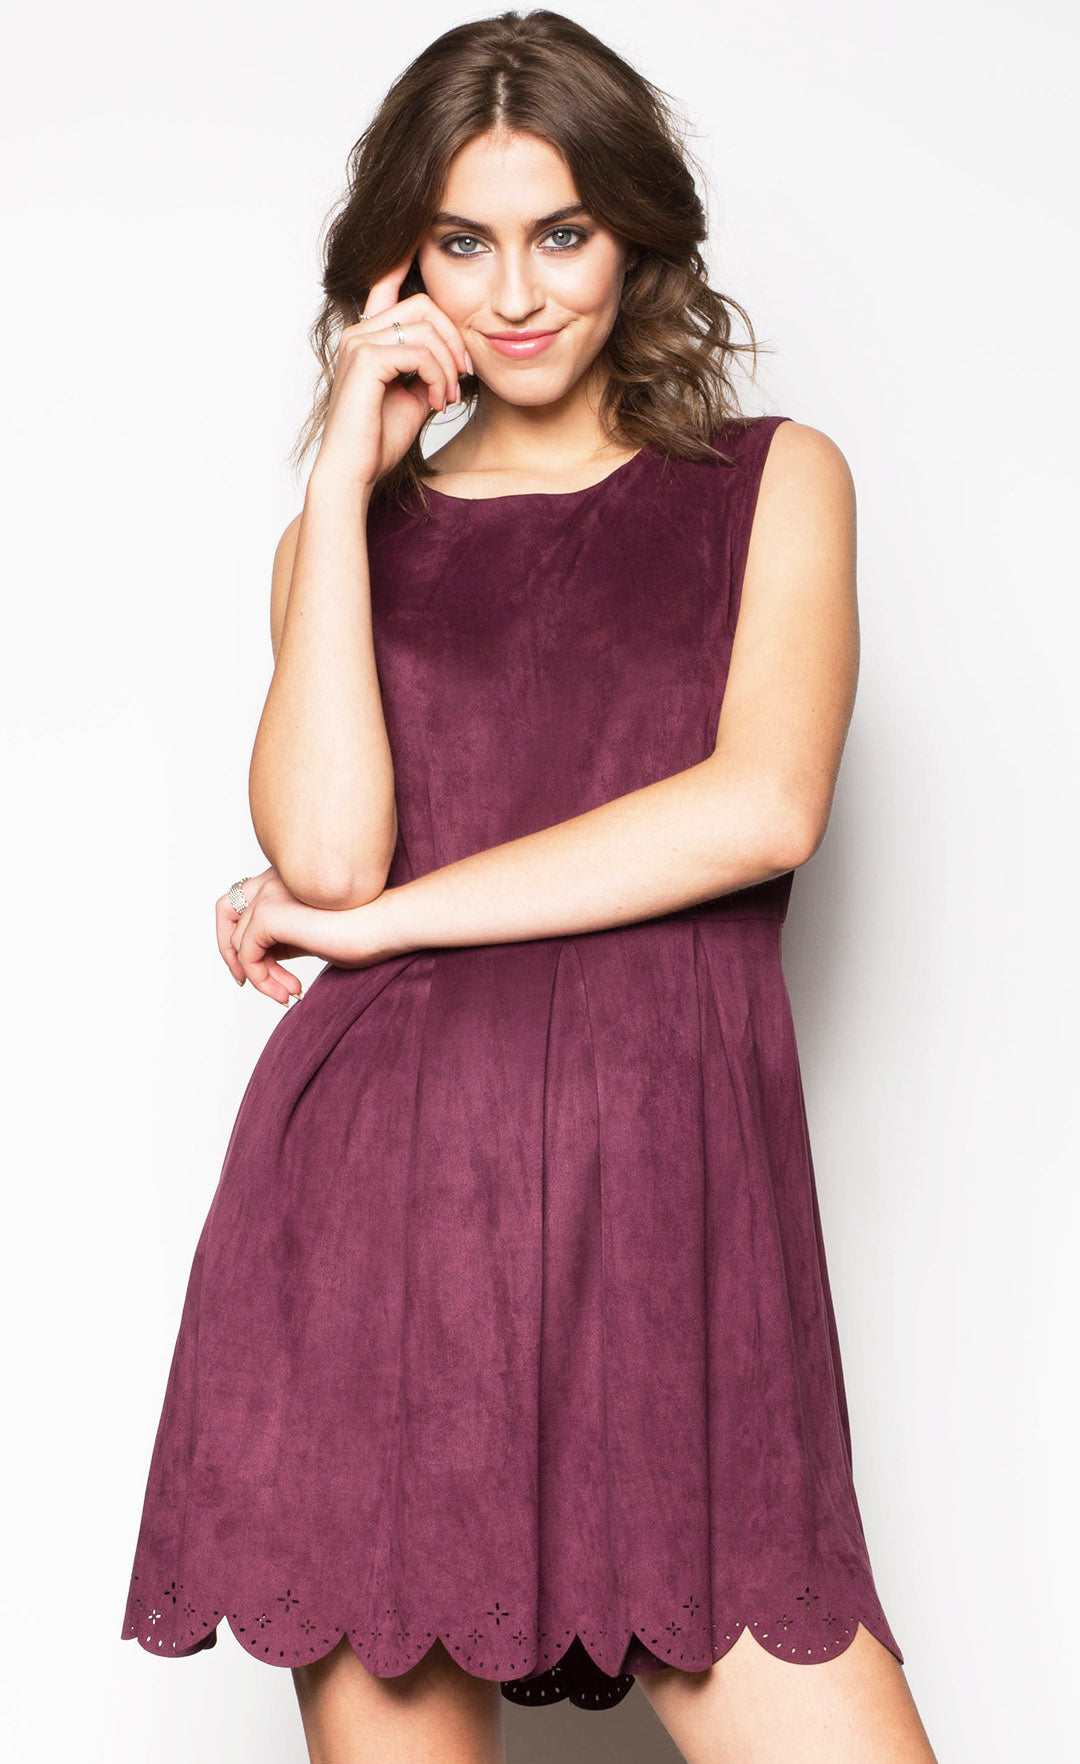 Persuede Me Dress - Pink Martini Collection